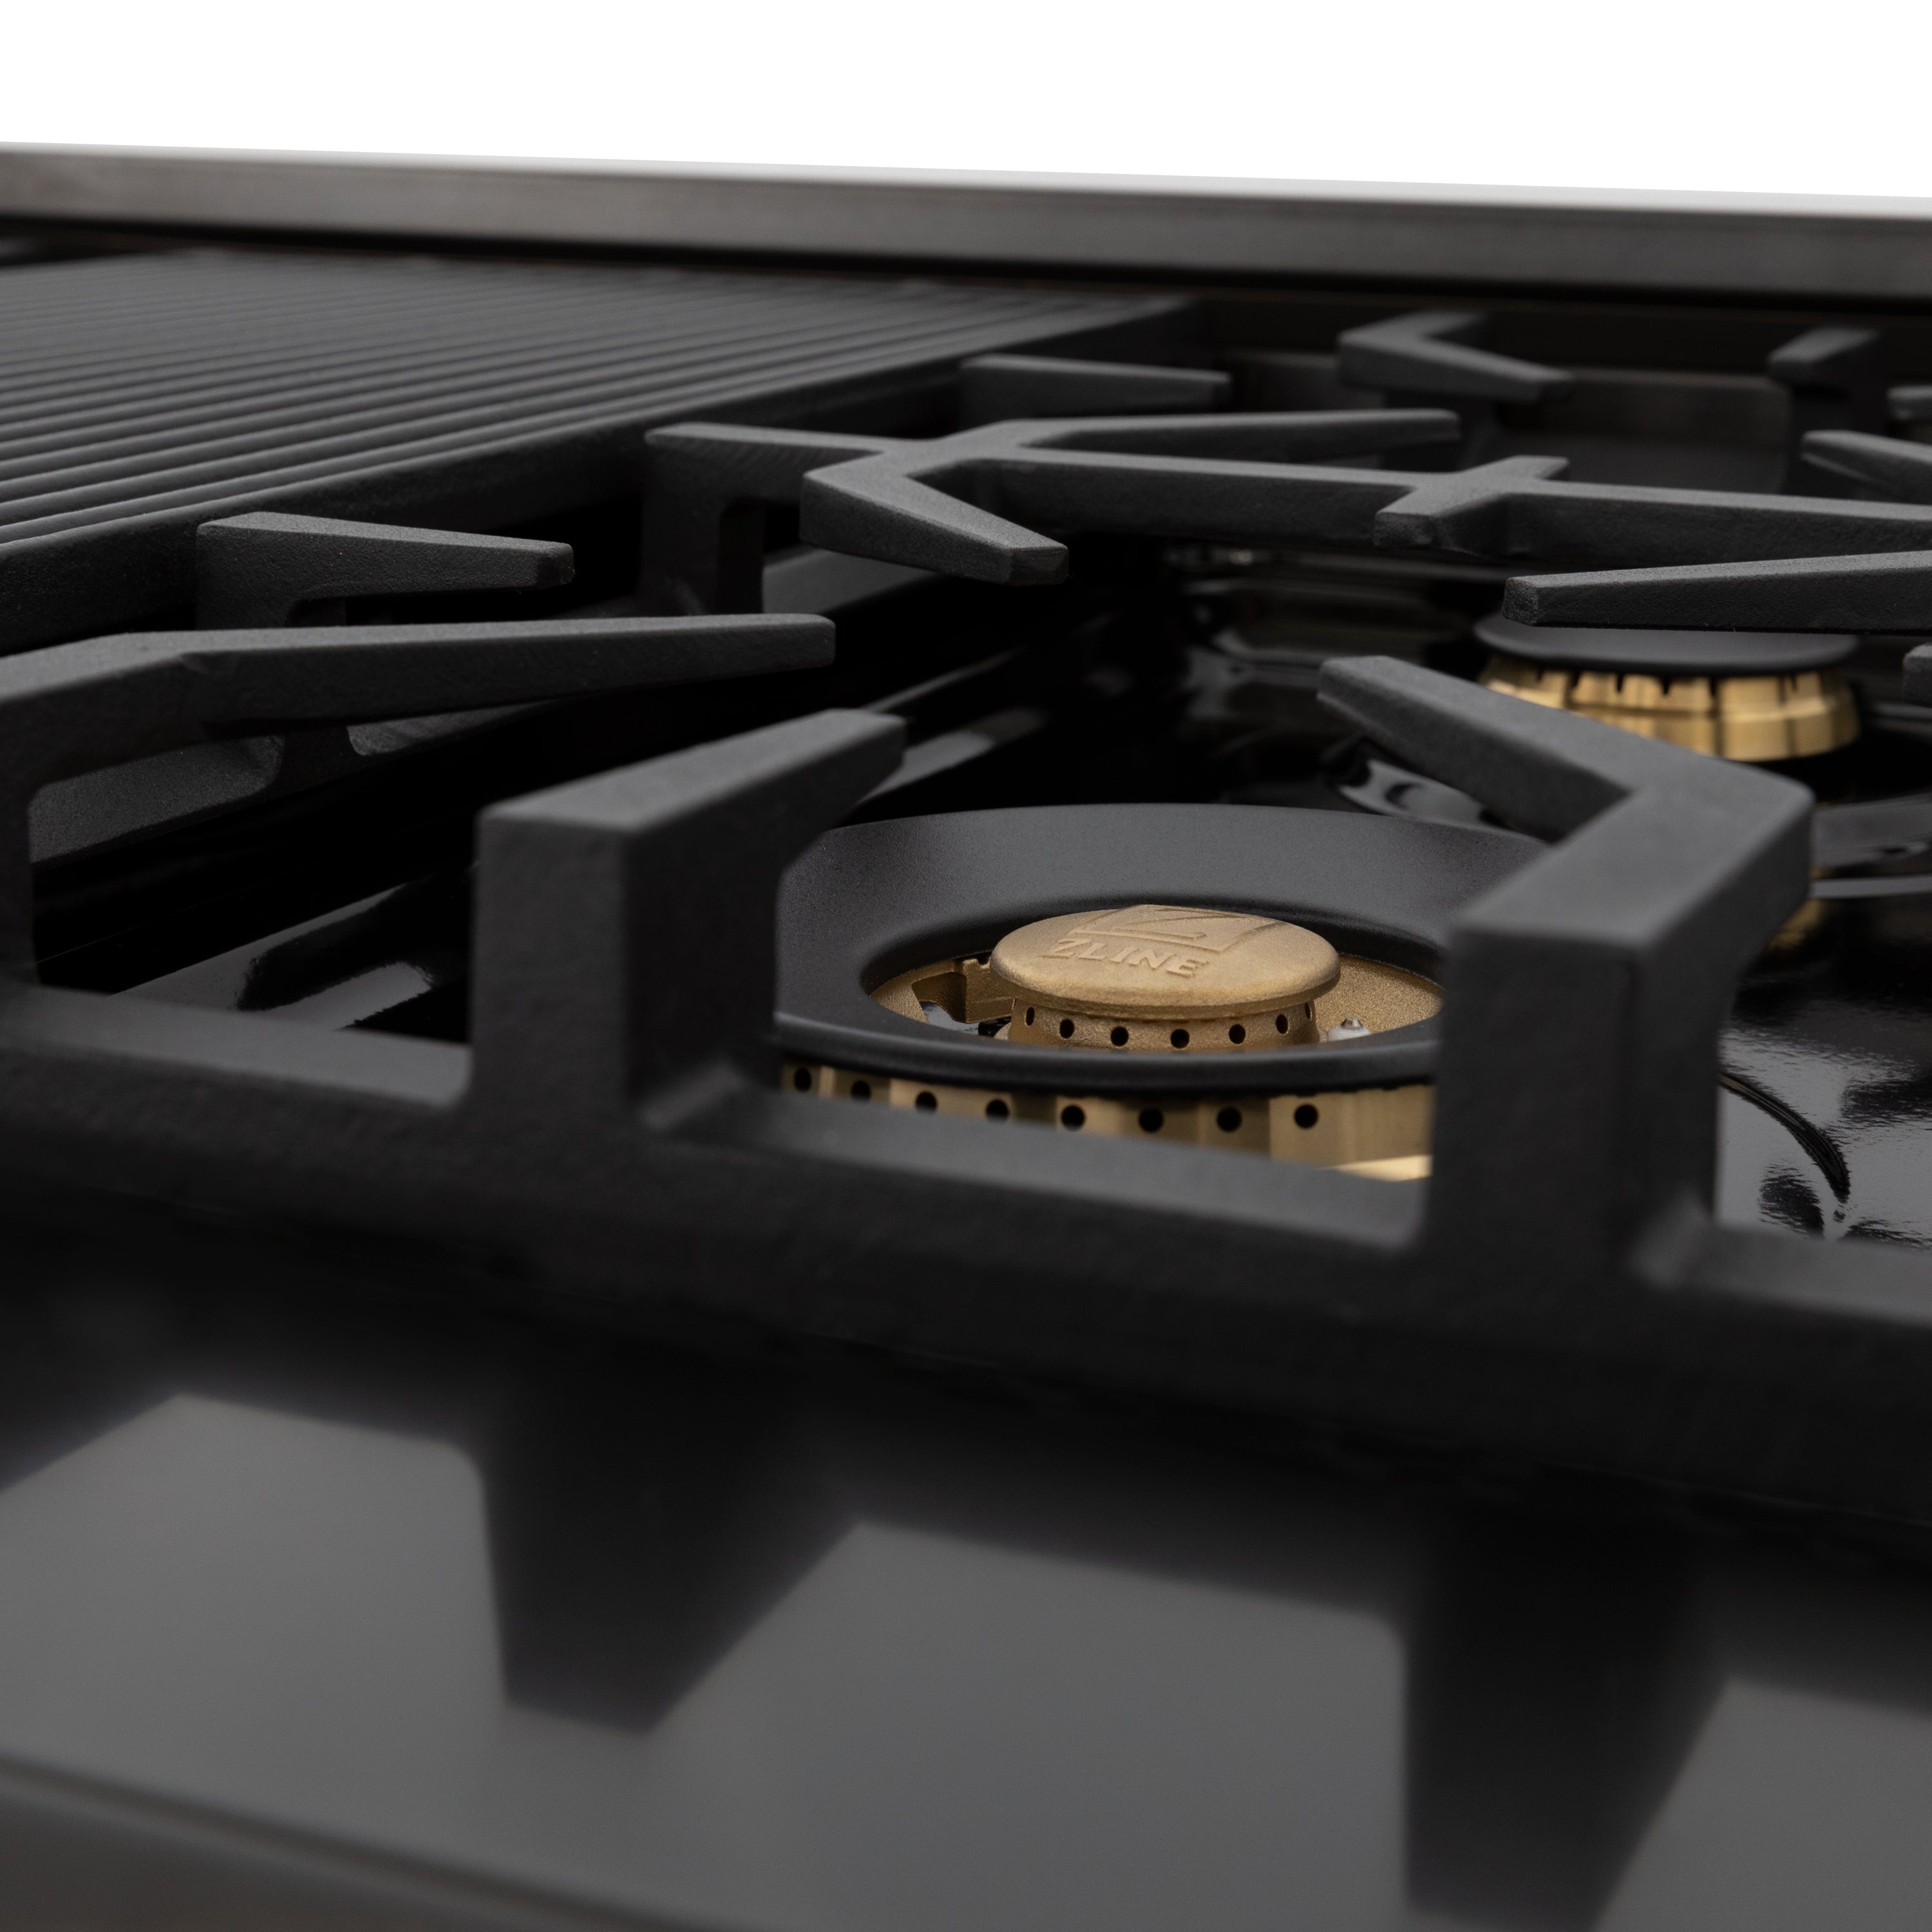 ZLINE Autograph Edition 48" Porcelain Rangetop with 7 Gas Burners in Black Stainless Steel and Champagne Bronze Accents (RTBZ-48-CB)